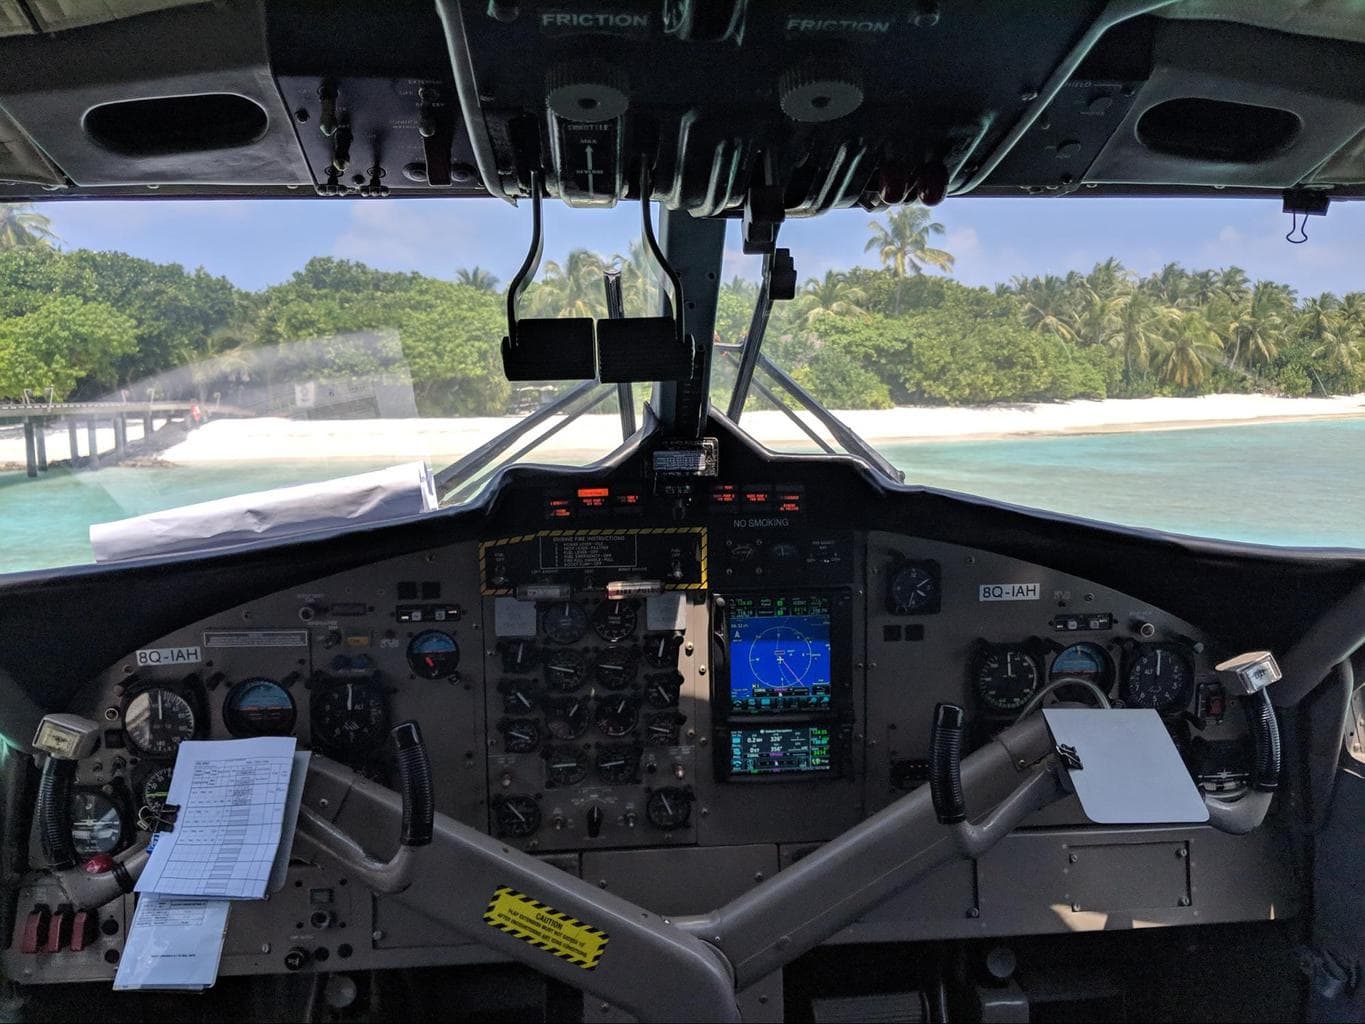 Inside the cockpit of a seaplane